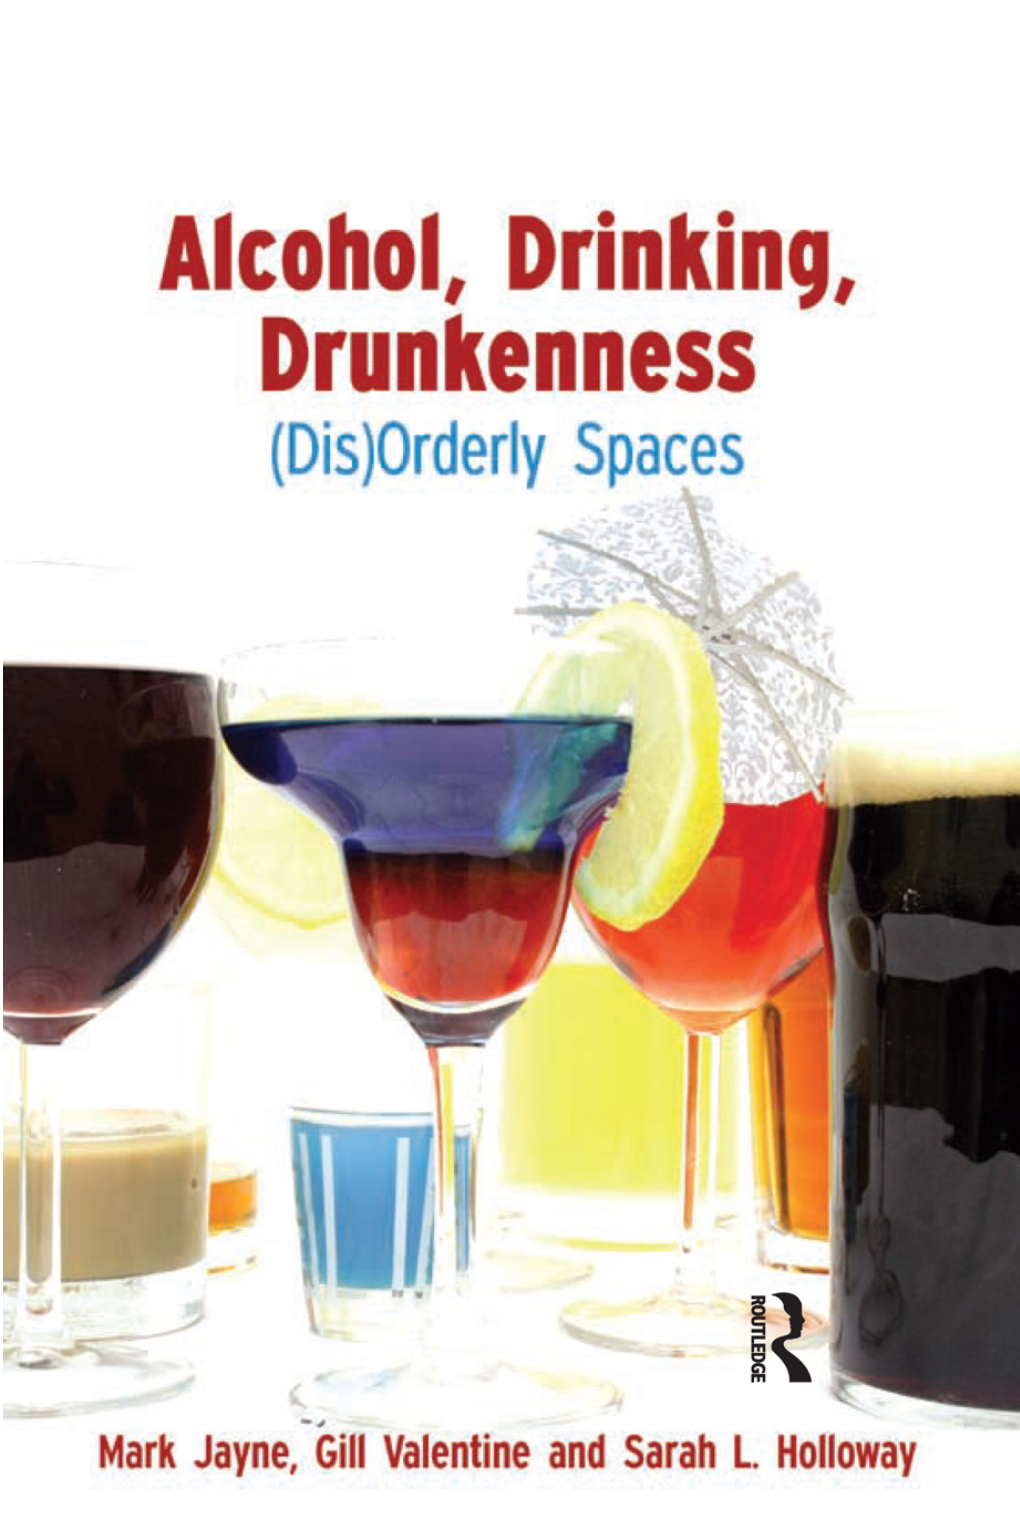 ALCOHOL, DRINKING, DRUNKENNESS This Page Has Been Left Blank Intentionally Alcohol, Drinking, Drunkenness (Dis)Orderly Spaces